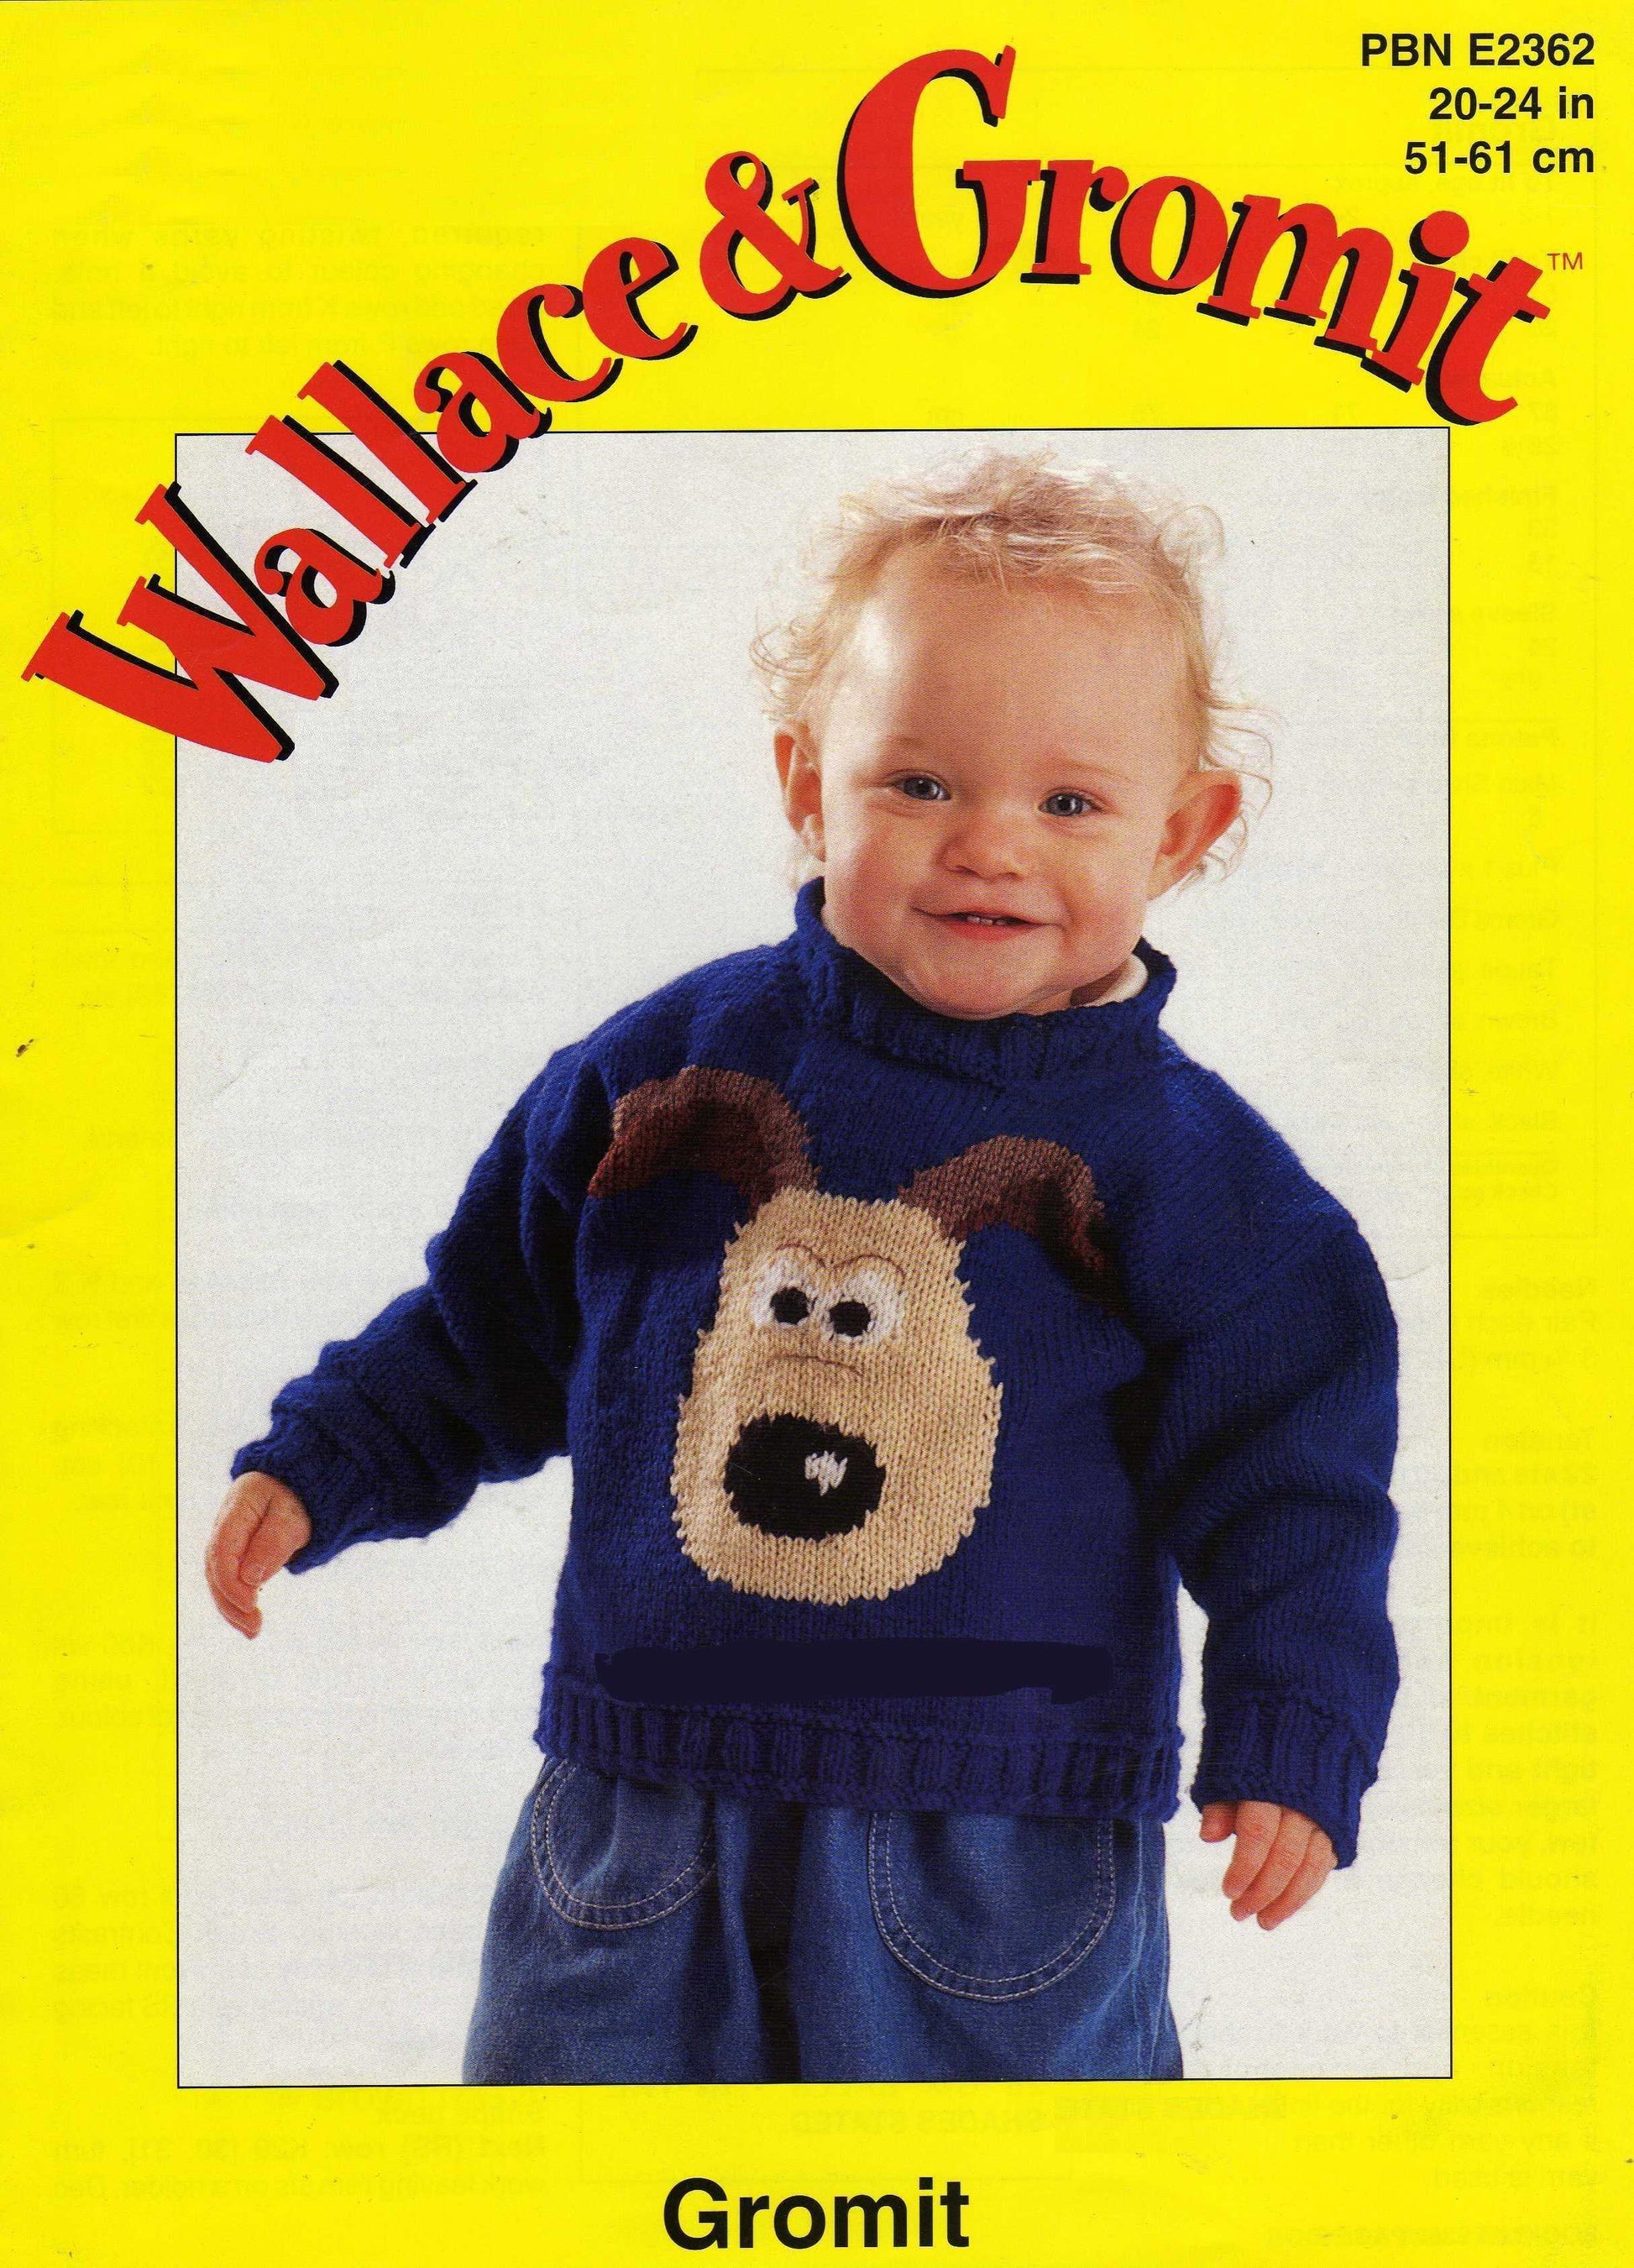  Gromit Childs Knitting Pattern by Cross Stitch Chart Heaven sold by Free Spirit Accessories